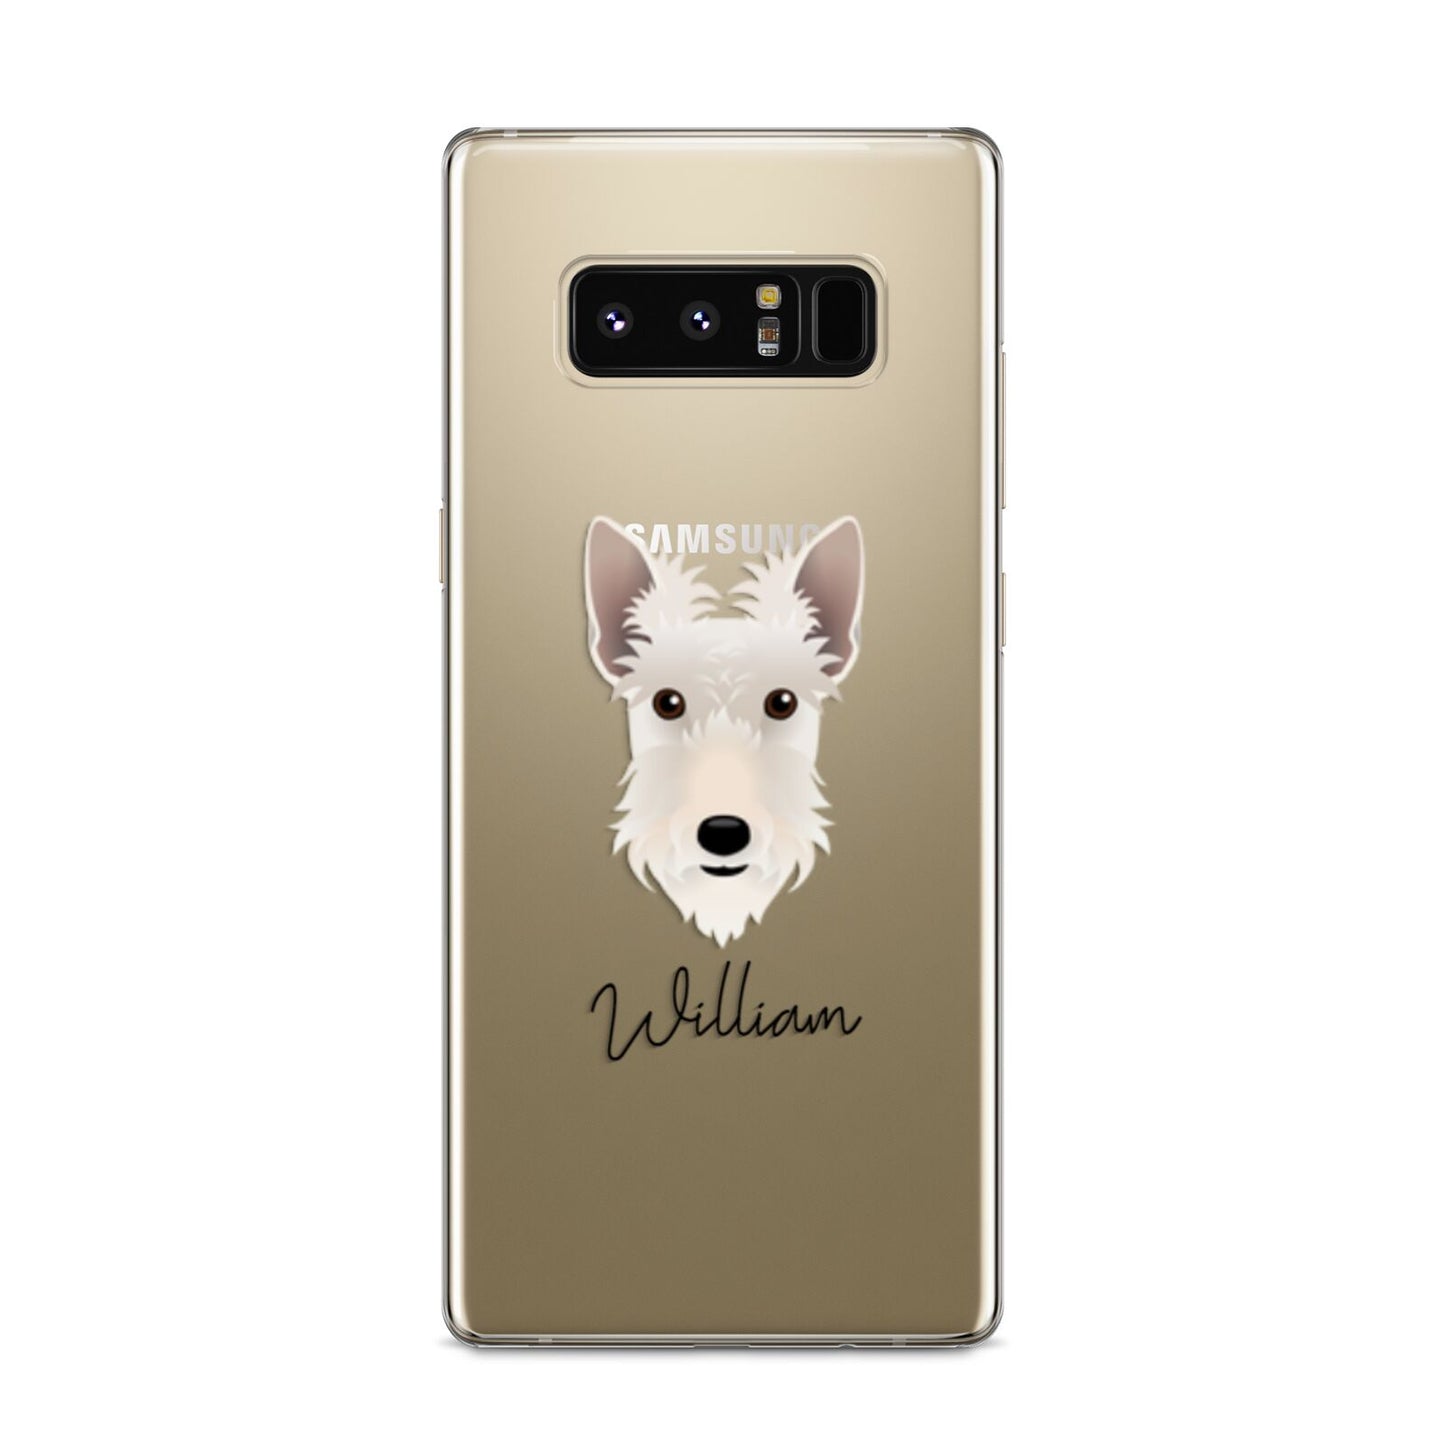 Scottish Terrier Personalised Samsung Galaxy S8 Case